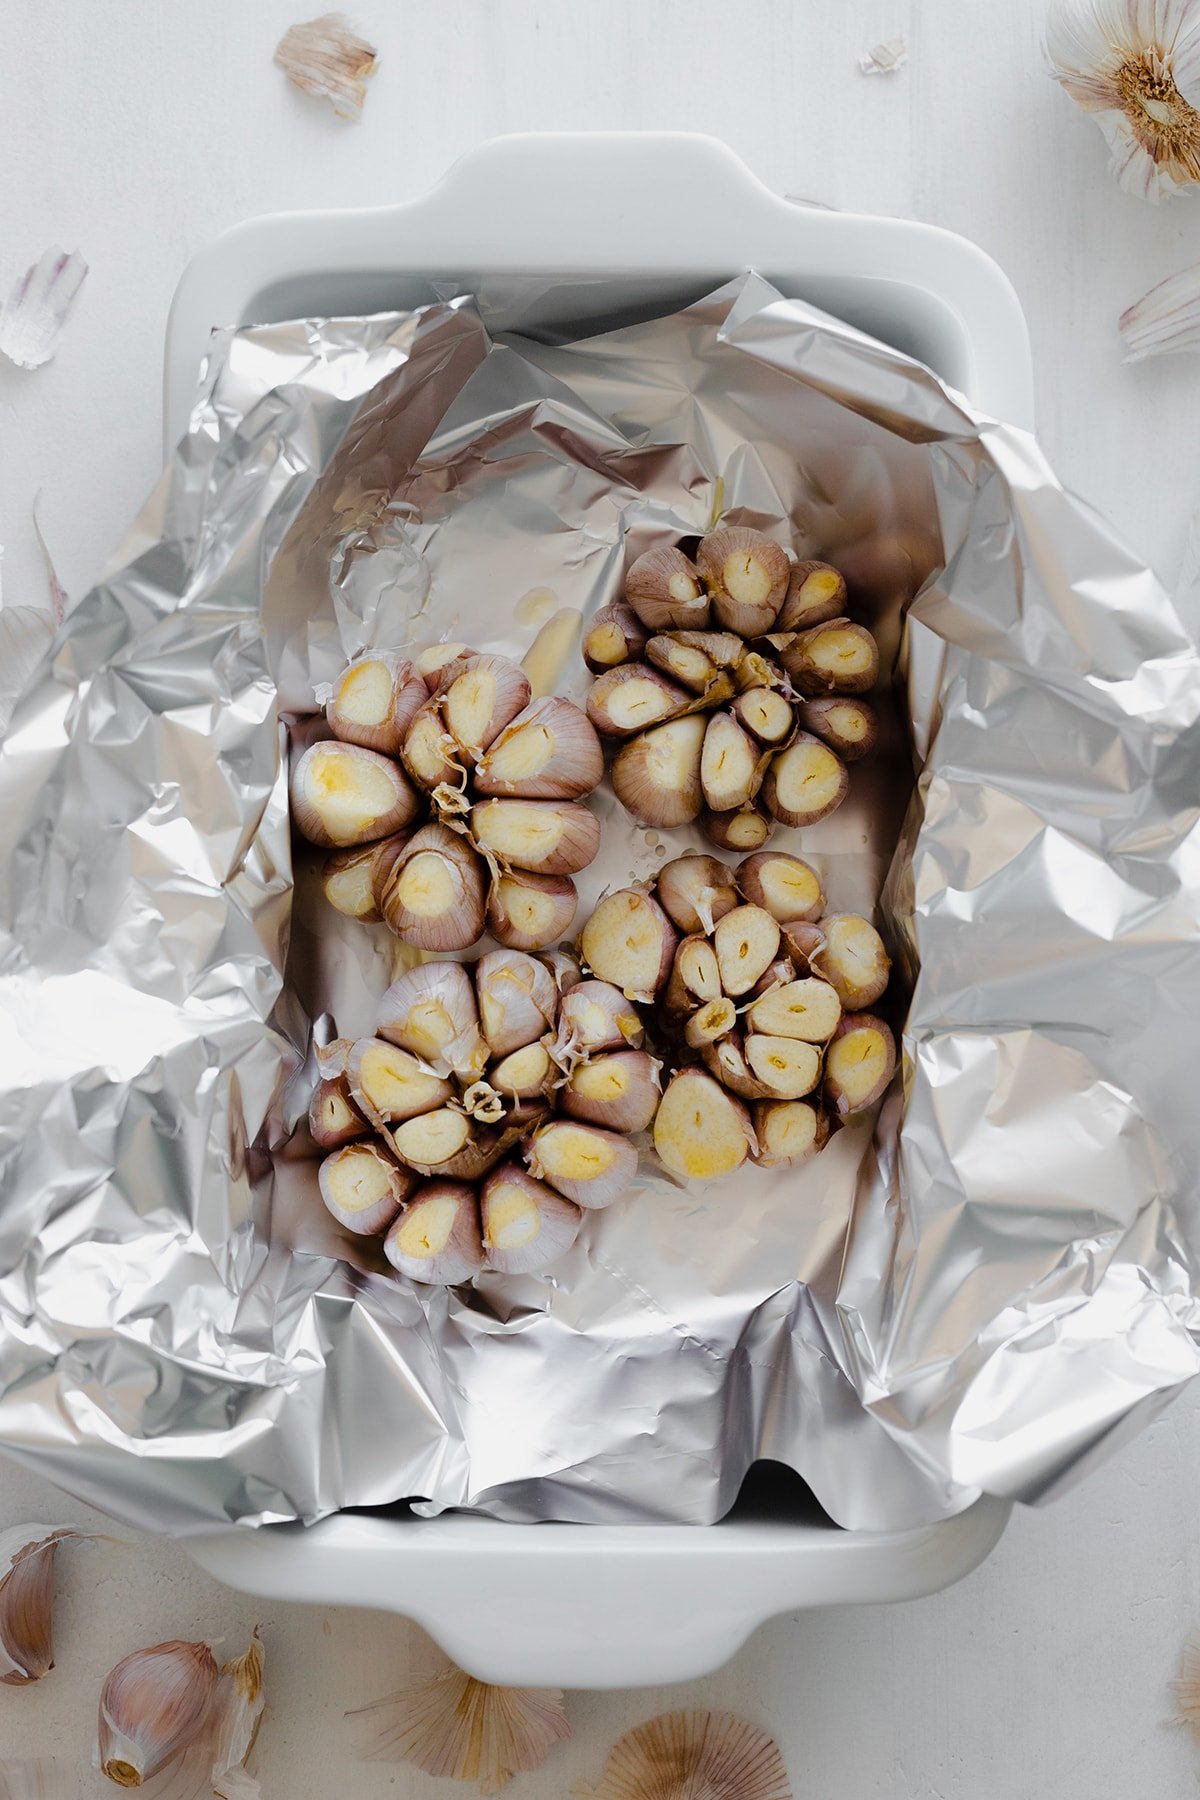 Four whole garlic bulbs on foil in a white baking dish. White background, overhead shot.